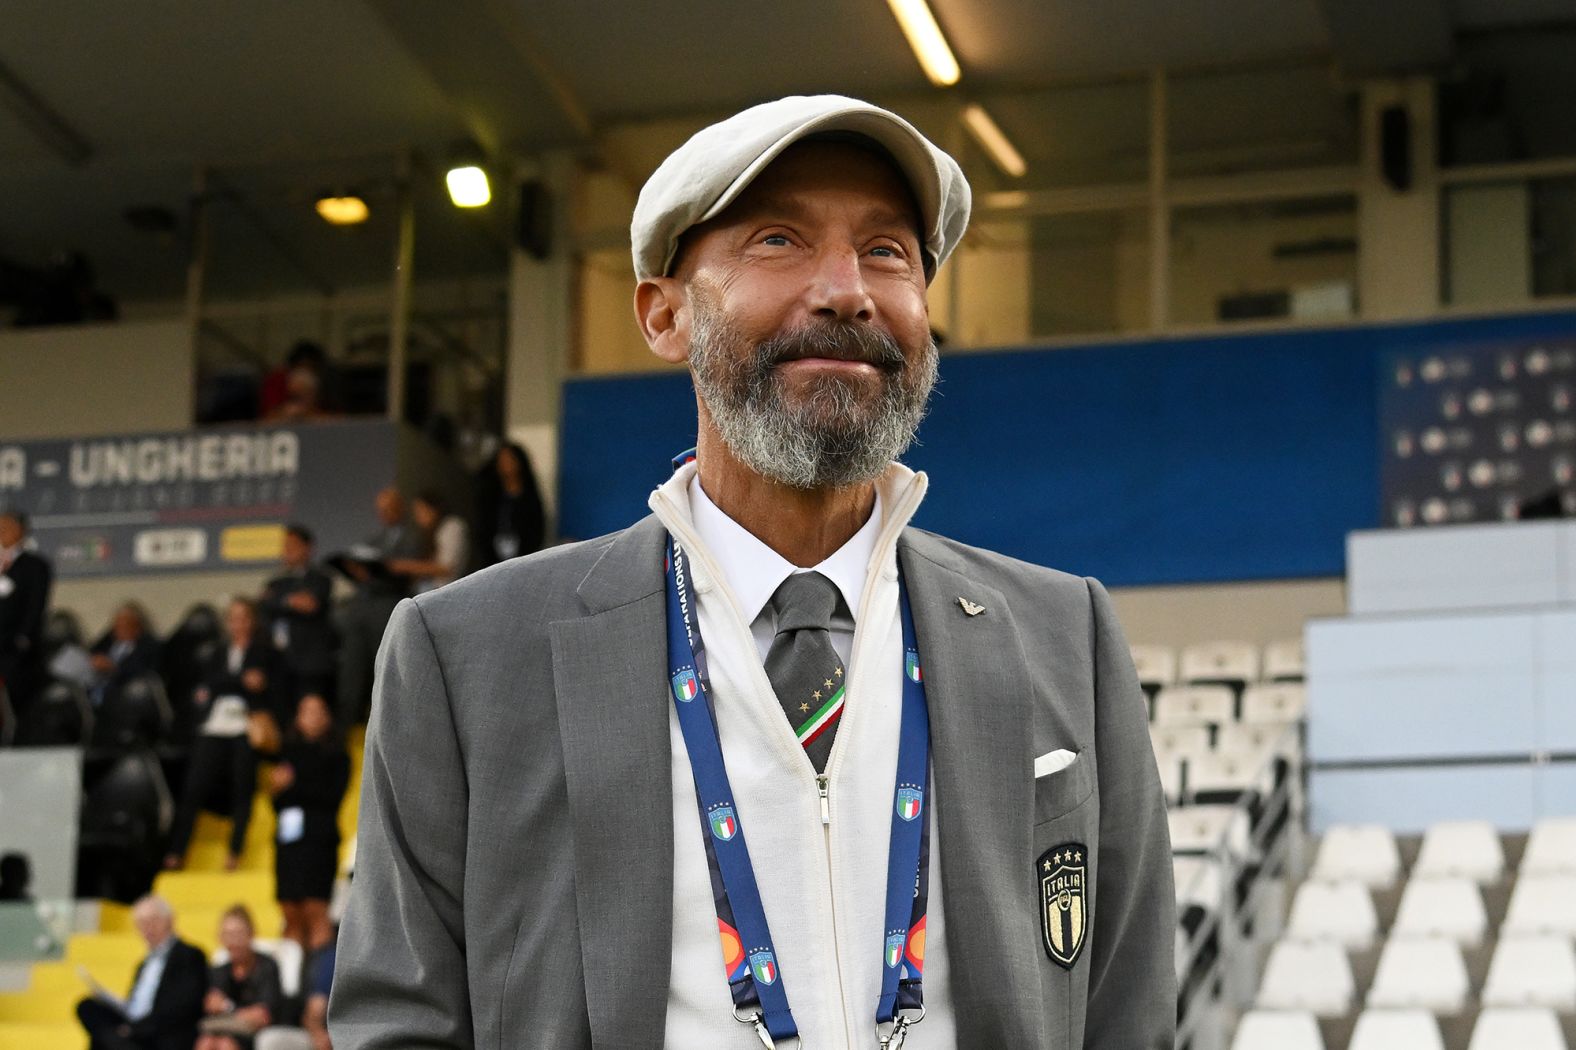 Italian football legend <a href="index.php?page=&url=https%3A%2F%2Fedition.cnn.com%2F2023%2F01%2F06%2Ffootball%2Fgianluca-vialli-death-spt-intl%2Findex.html" target="_blank">Gianluca Vialli </a>died on January 6 after a battle with pancreatic cancer. Vialli, 58, played for Italian clubs Sampdoria and Juventus, where he won the 1996 Champions League before playing for the English Premier League team Chelsea. He also played 59 times for the Italian national team.